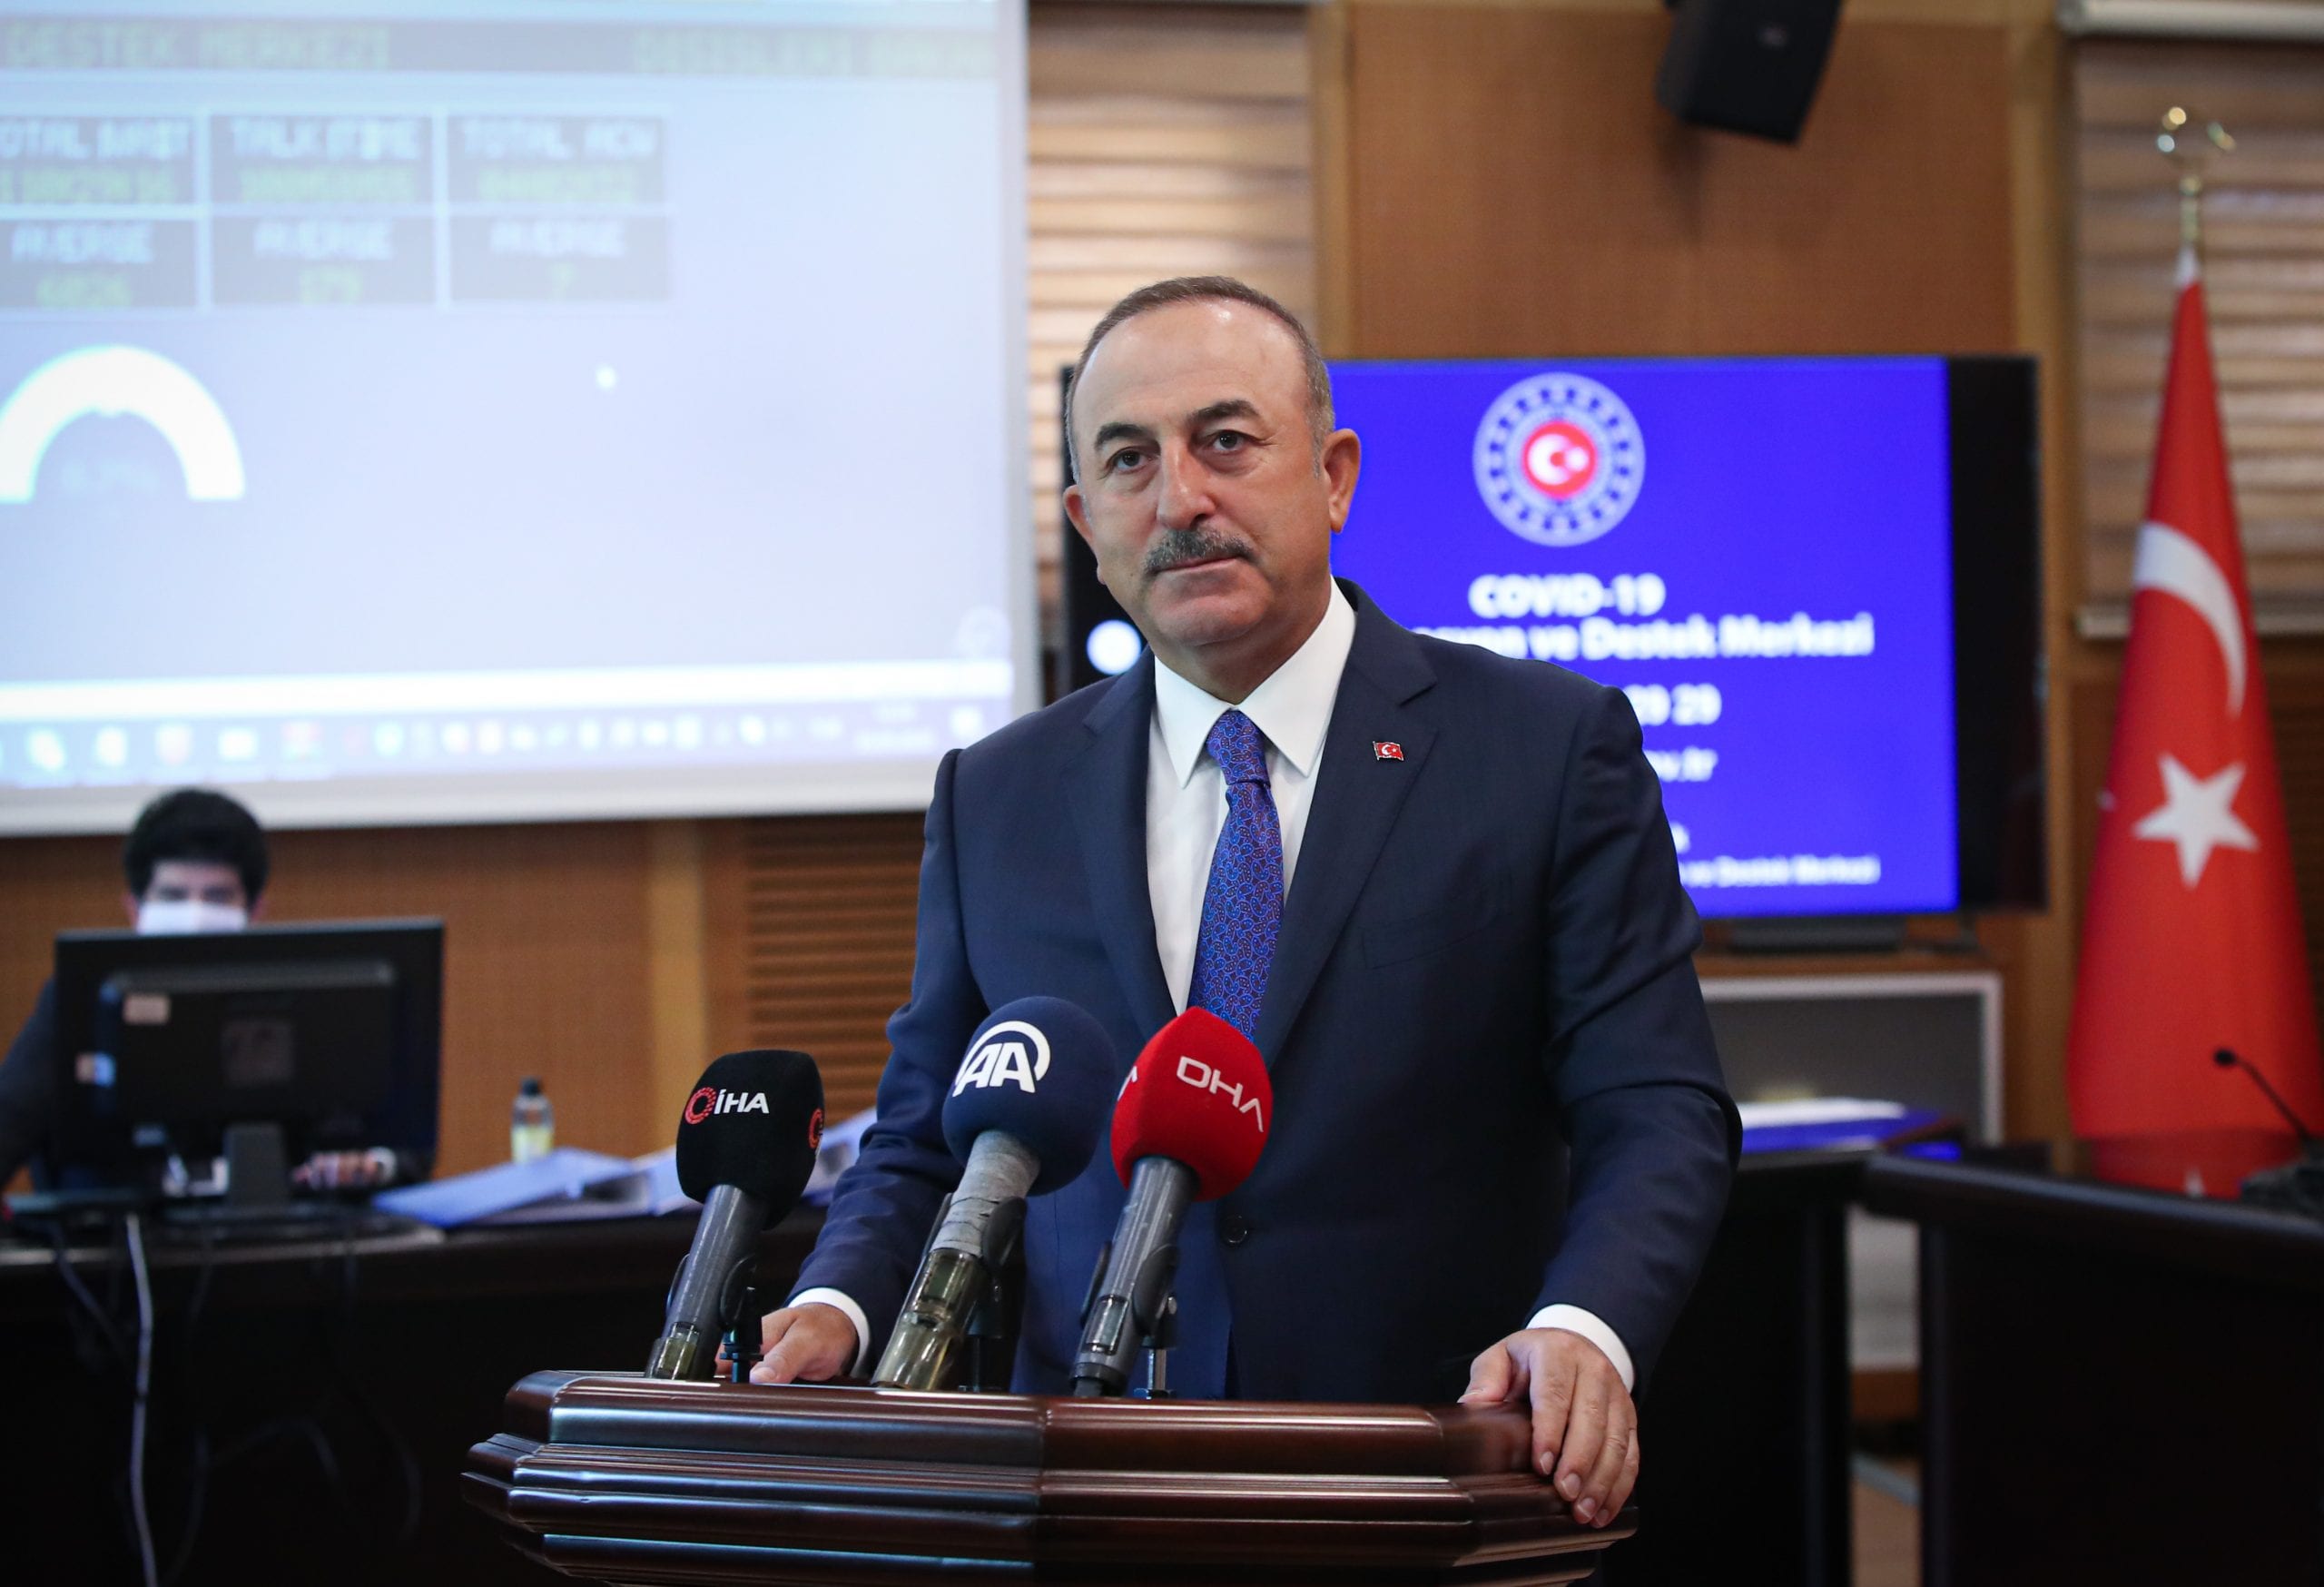 Turkey delivered supplies to fight virus to over 60 countries, Çavuşoğlu says